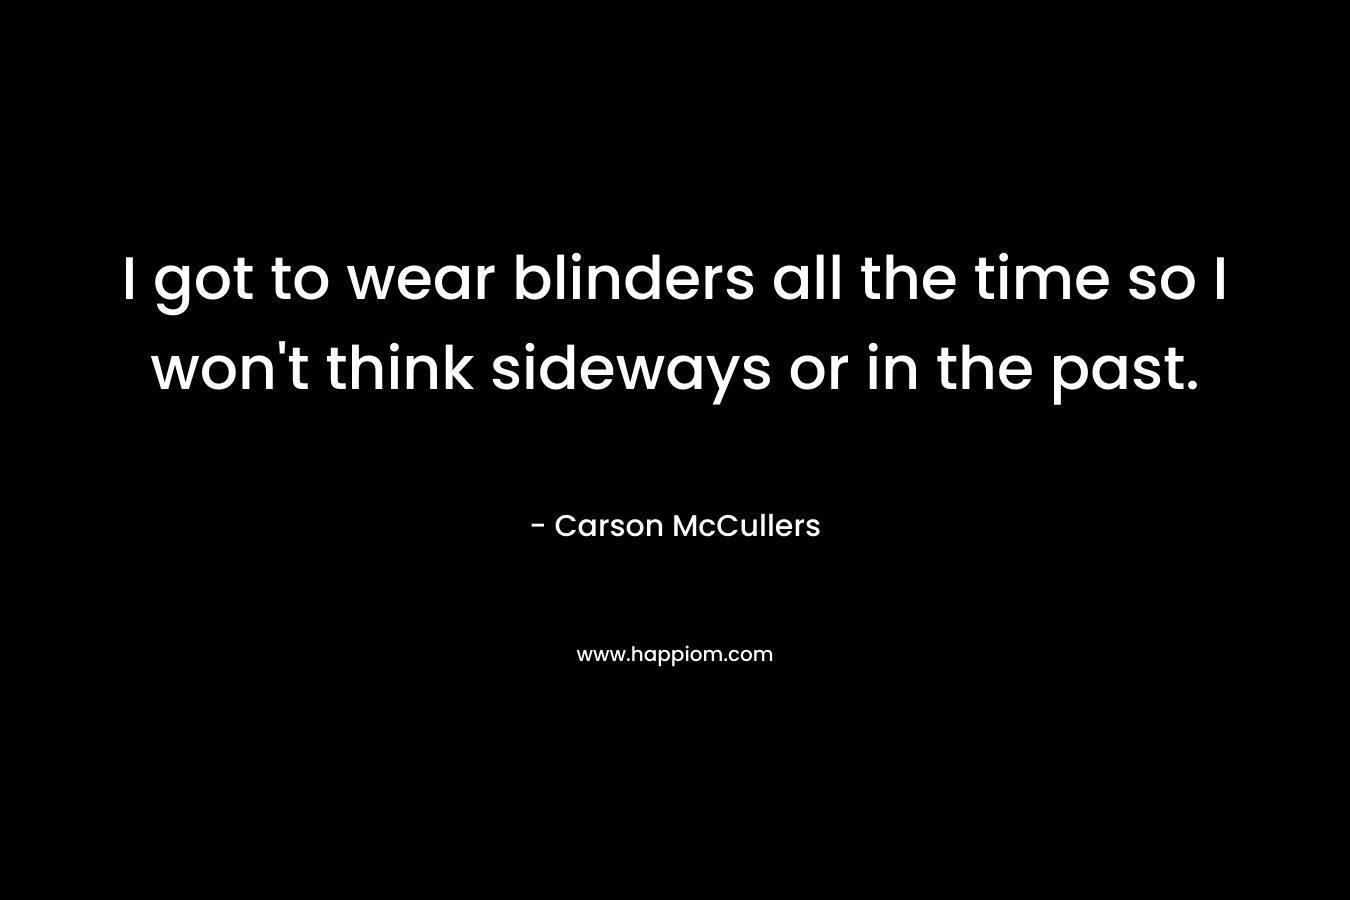 I got to wear blinders all the time so I won’t think sideways or in the past. – Carson McCullers